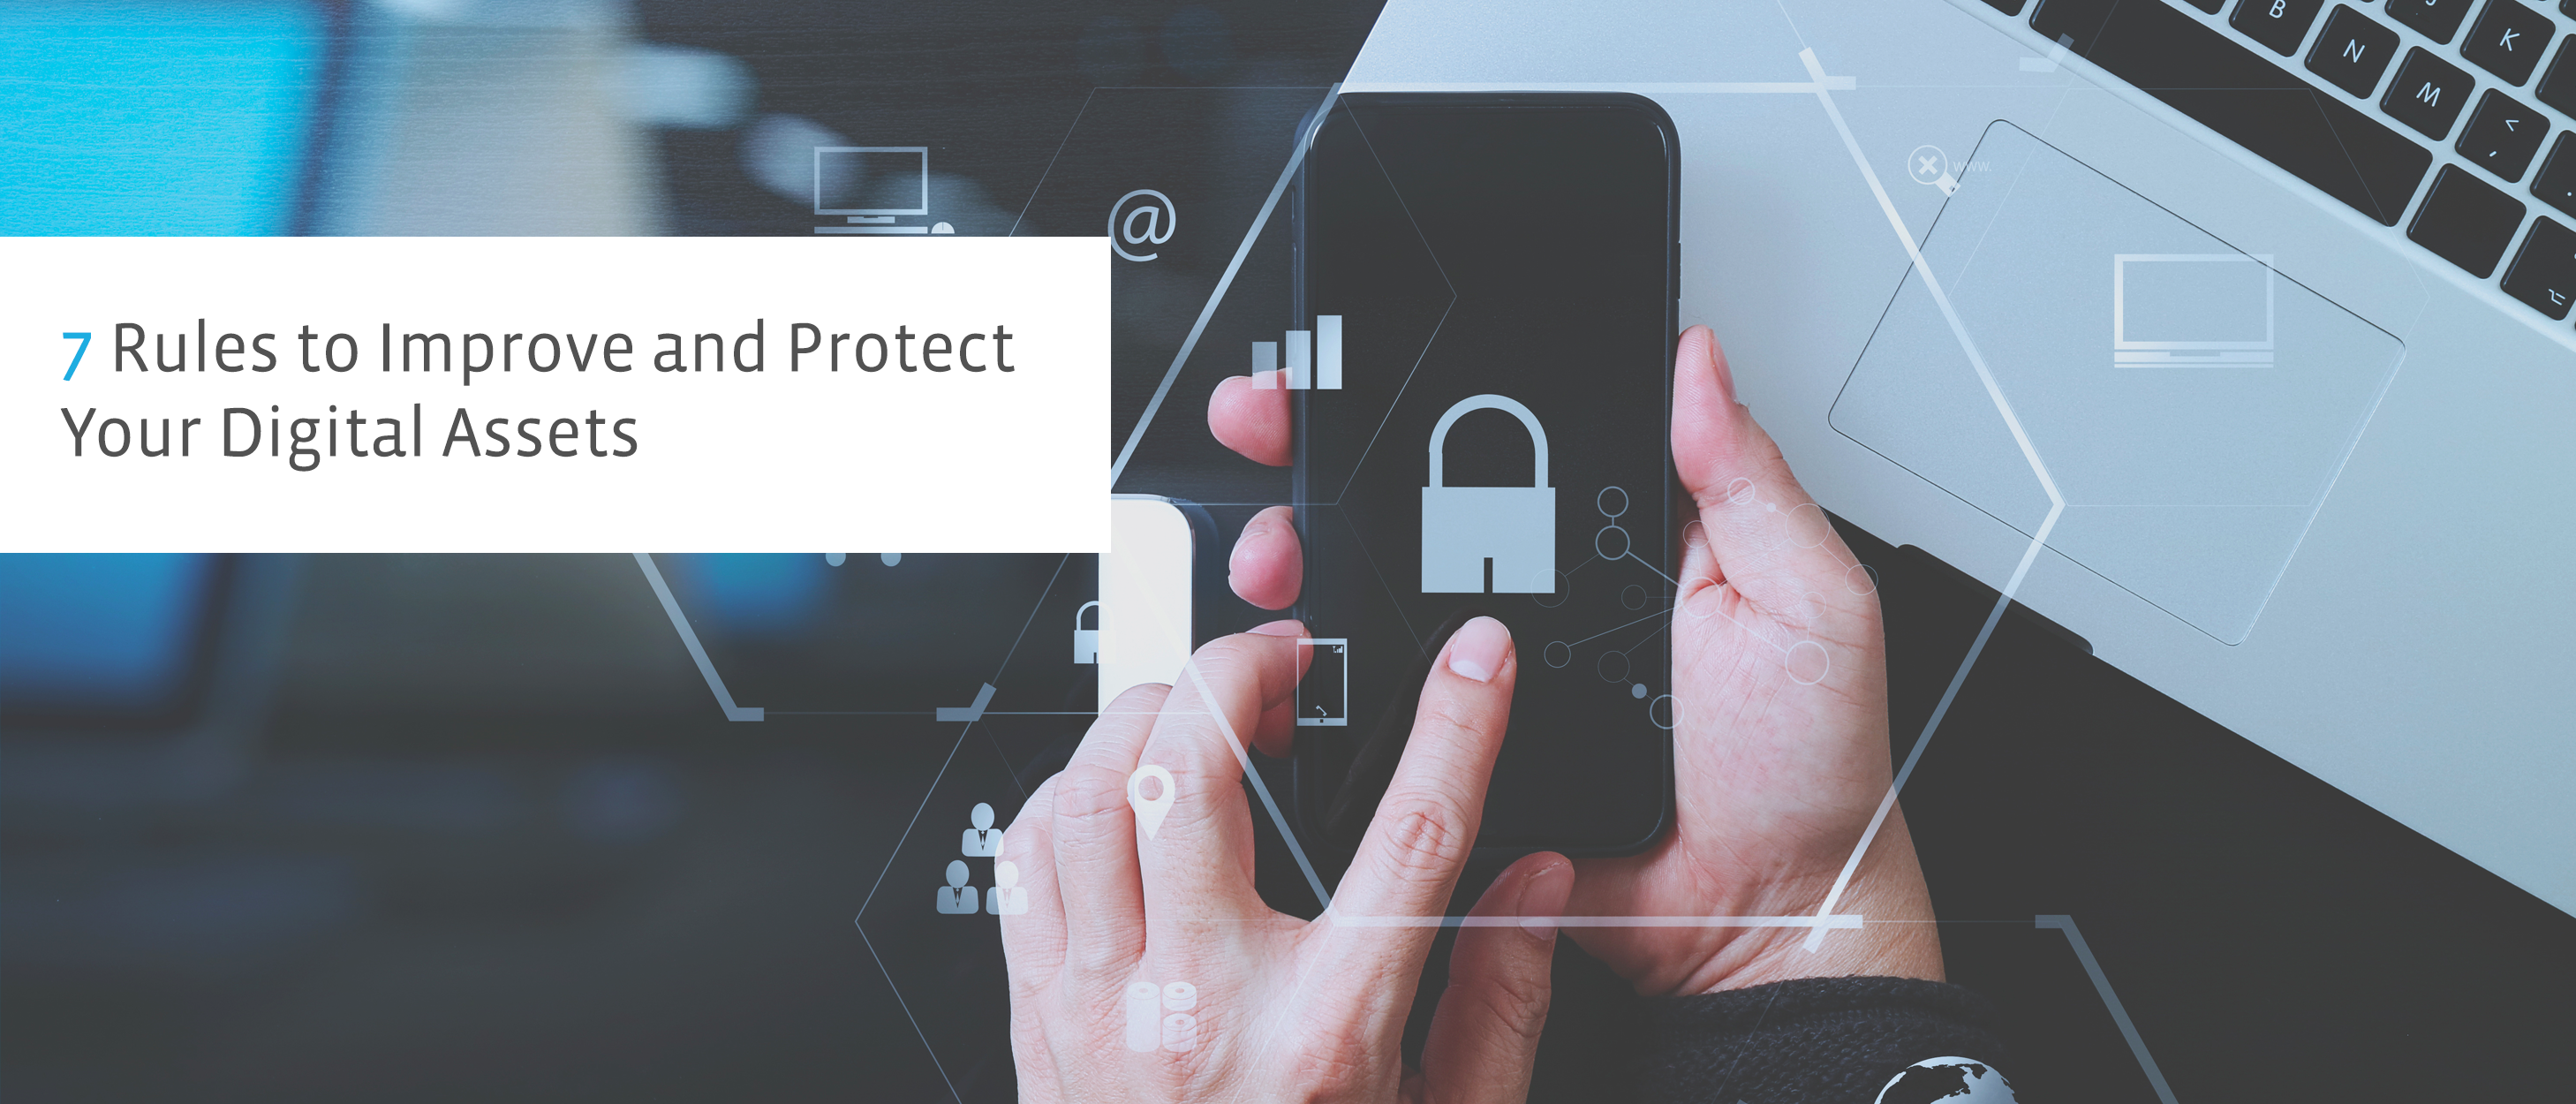 7 Rules to Improve and Protect Your Digital Assets